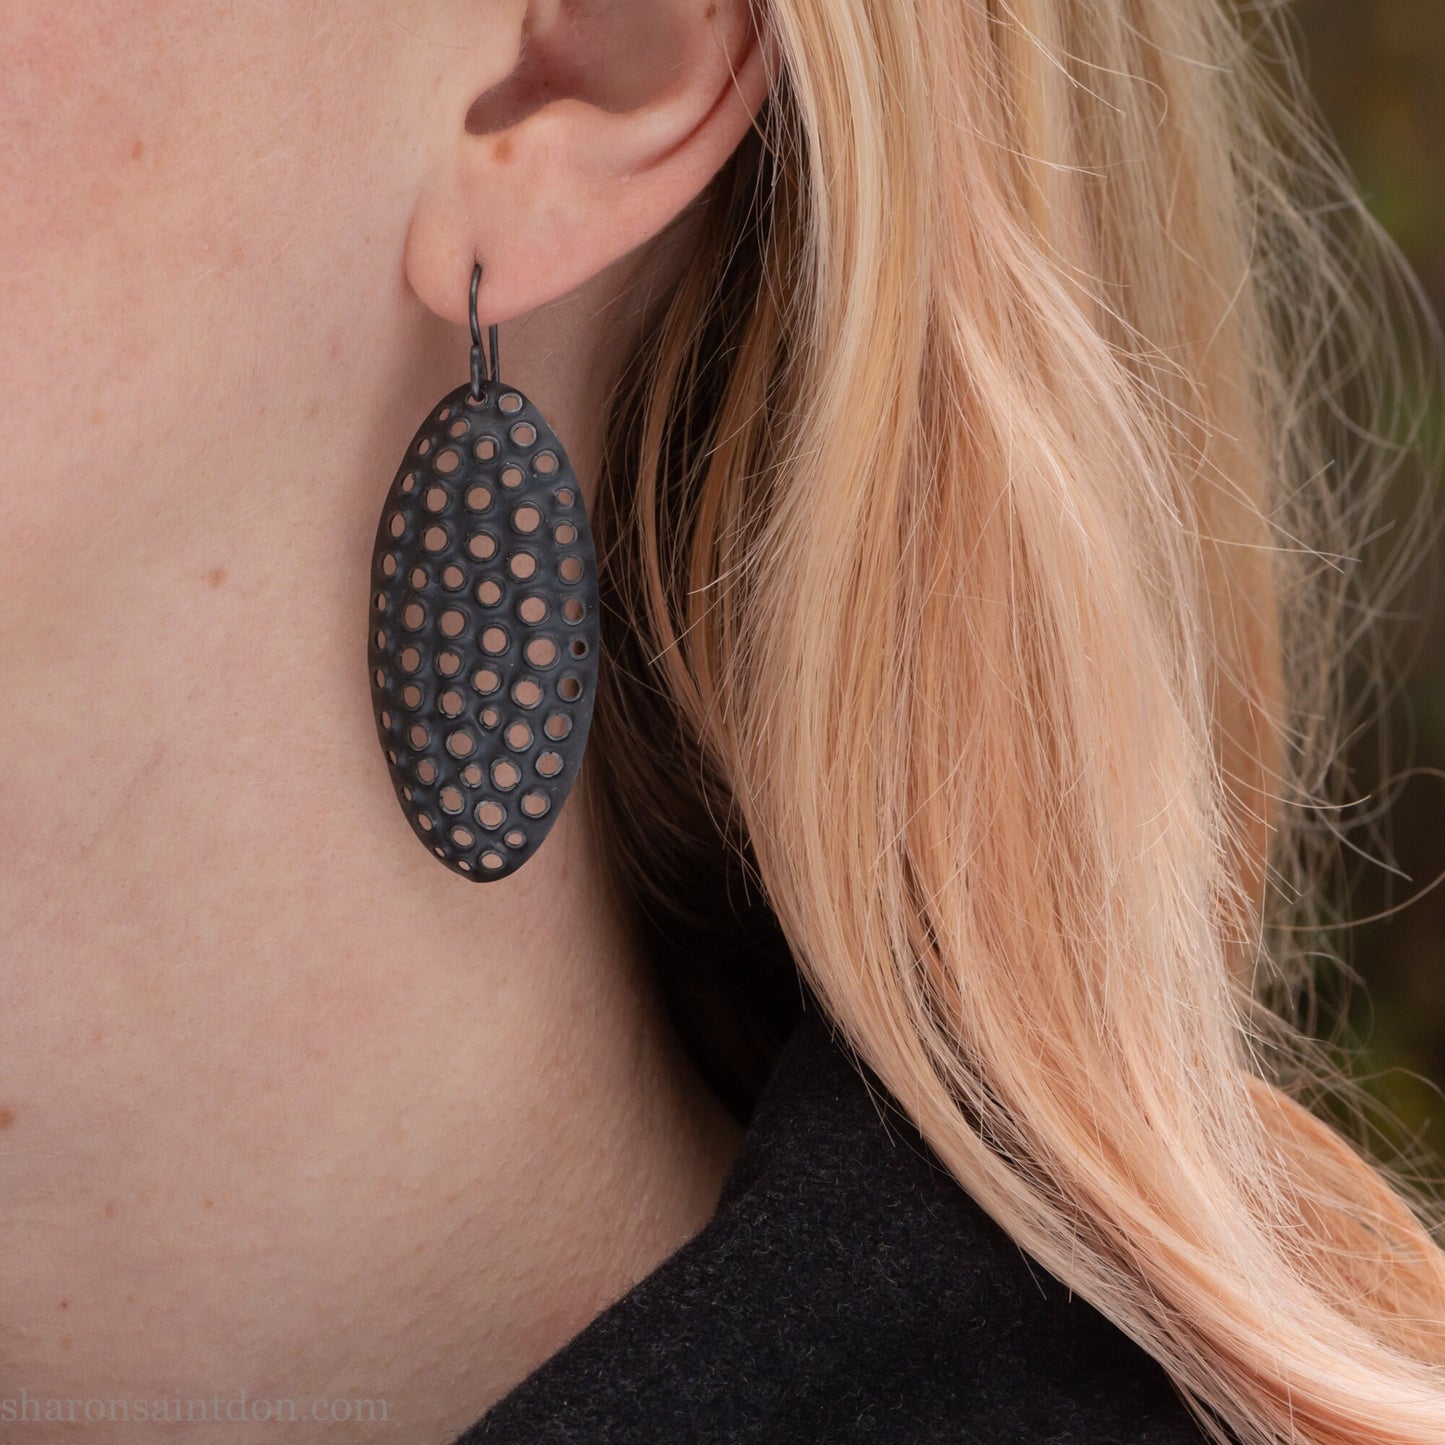 Handmade 925 sterling silver dangle earrings for women.Large oval oxidized black earrings made by Sharon SaintDon in North America.